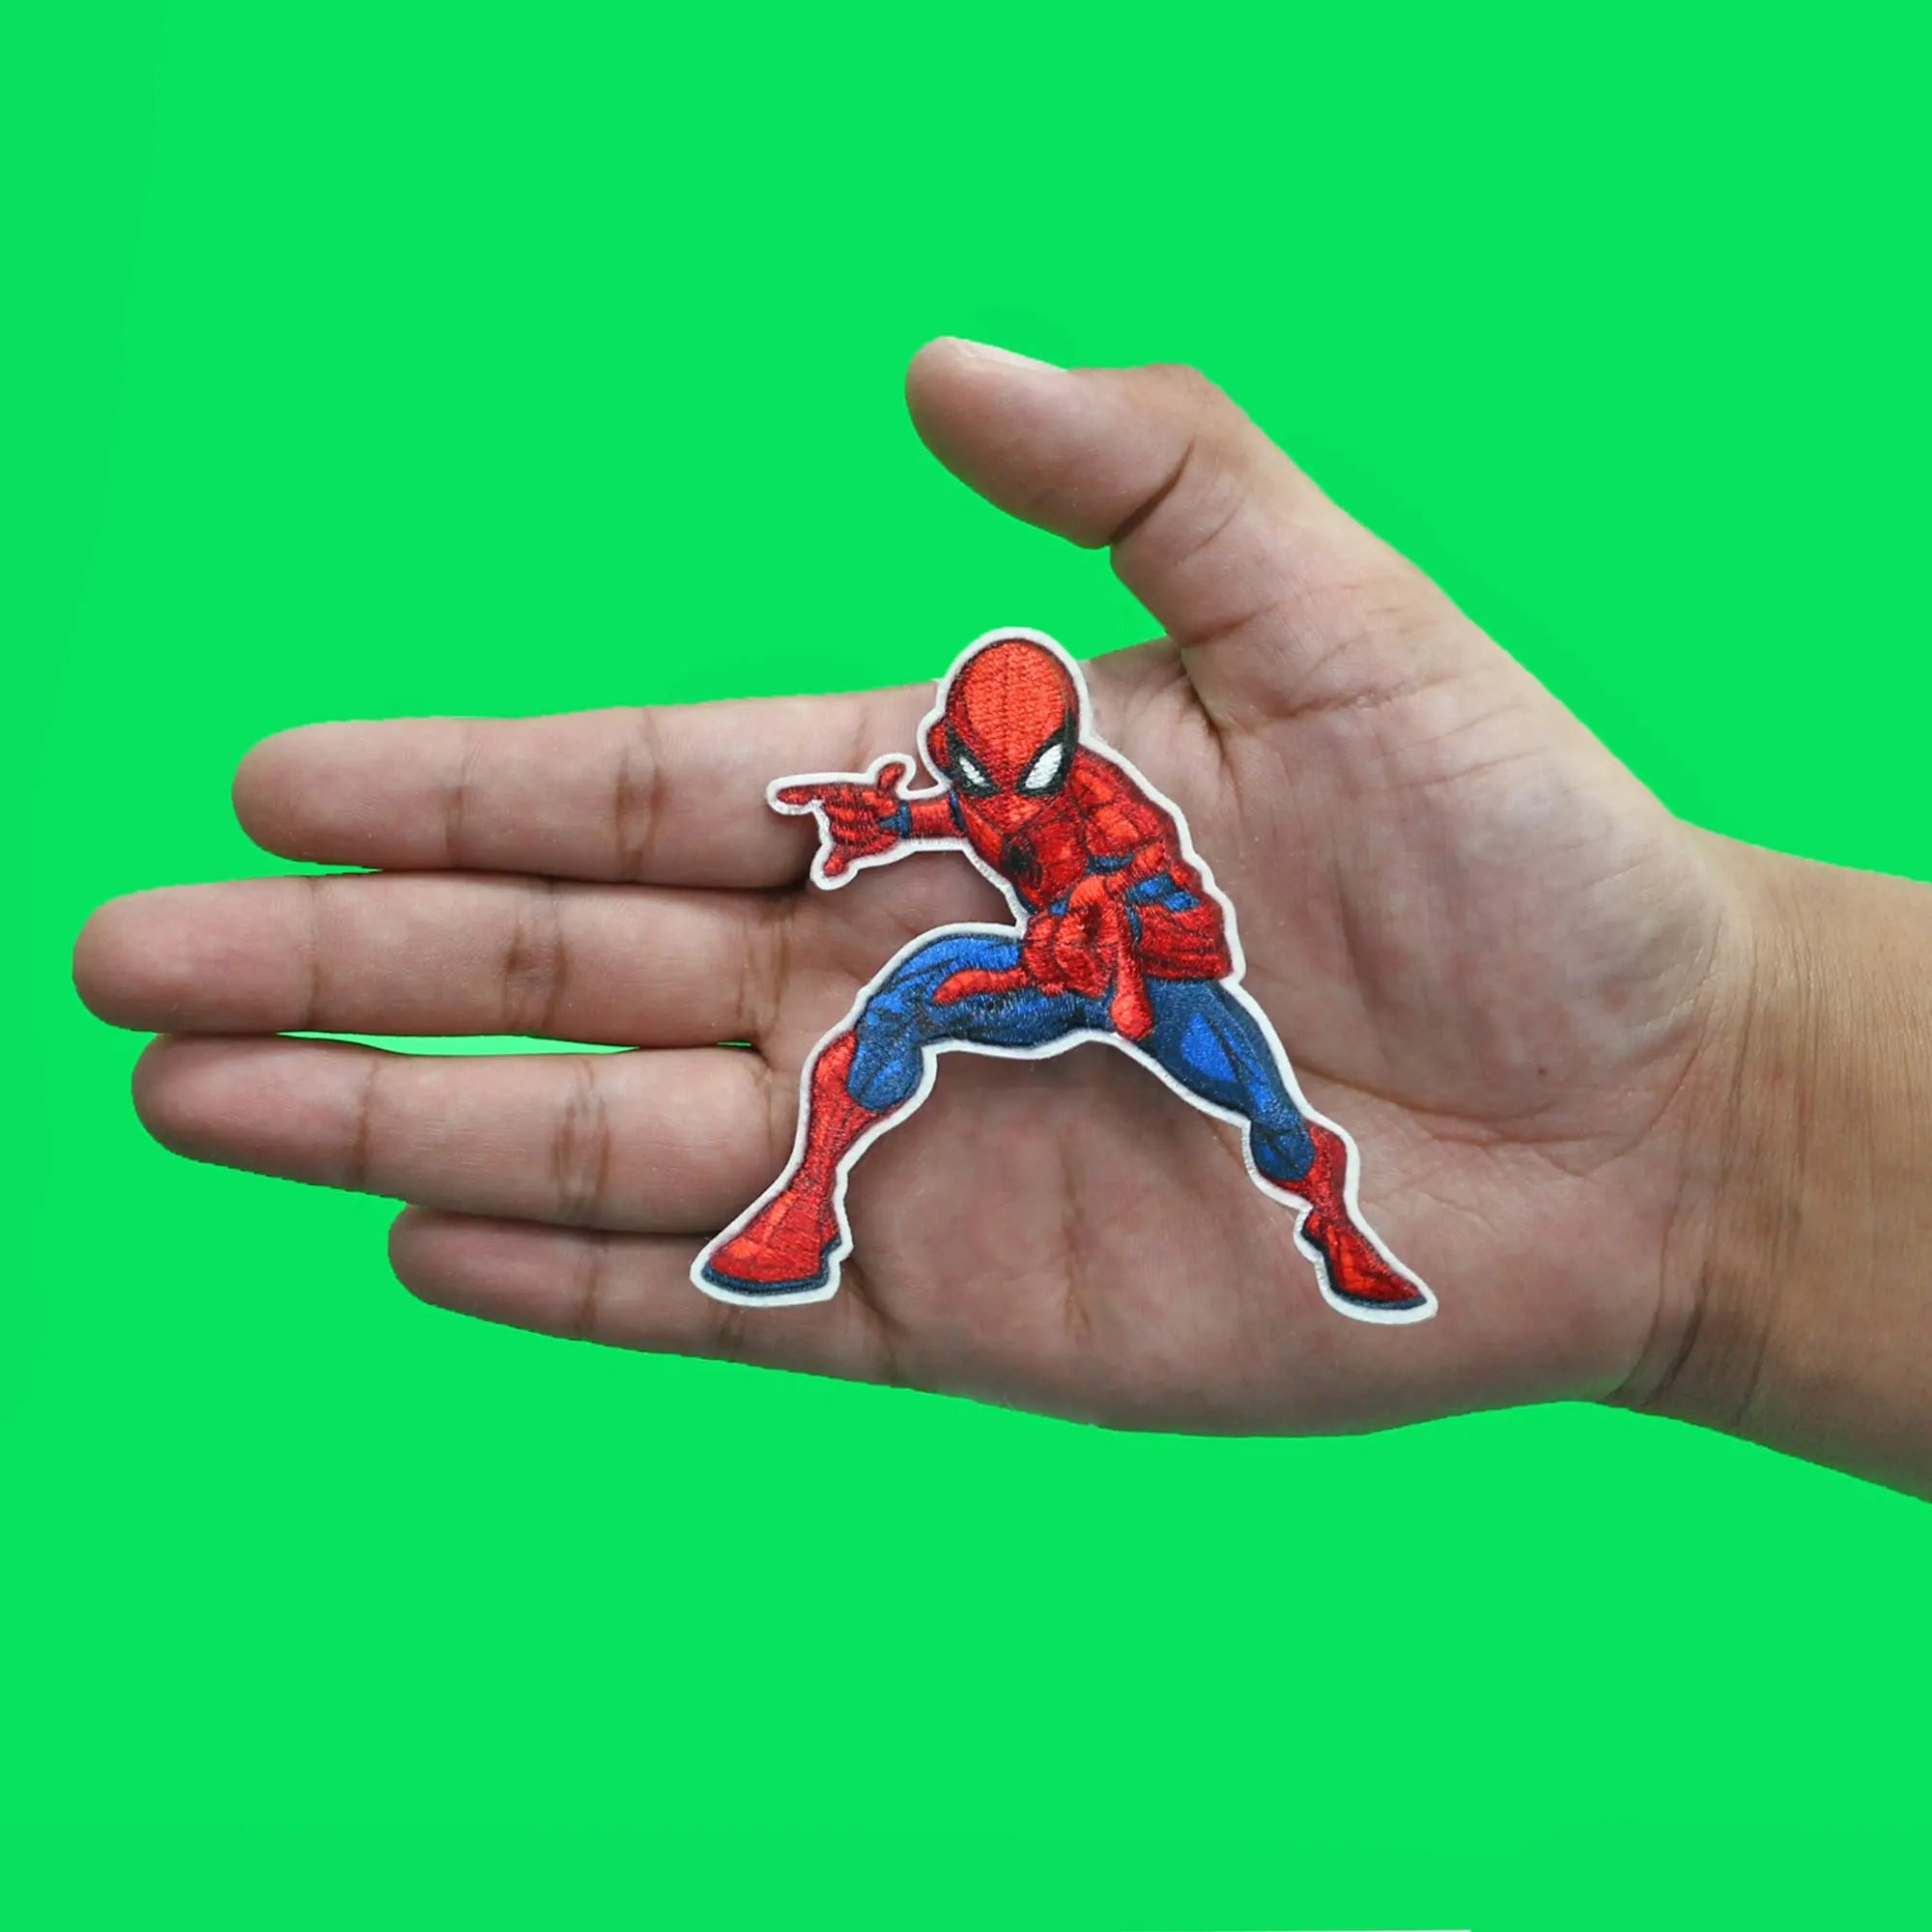 3D Printed Mafex Spider-Man #075 Wrist Joints (4-Pack) Ver. 2 – Dstar Toys